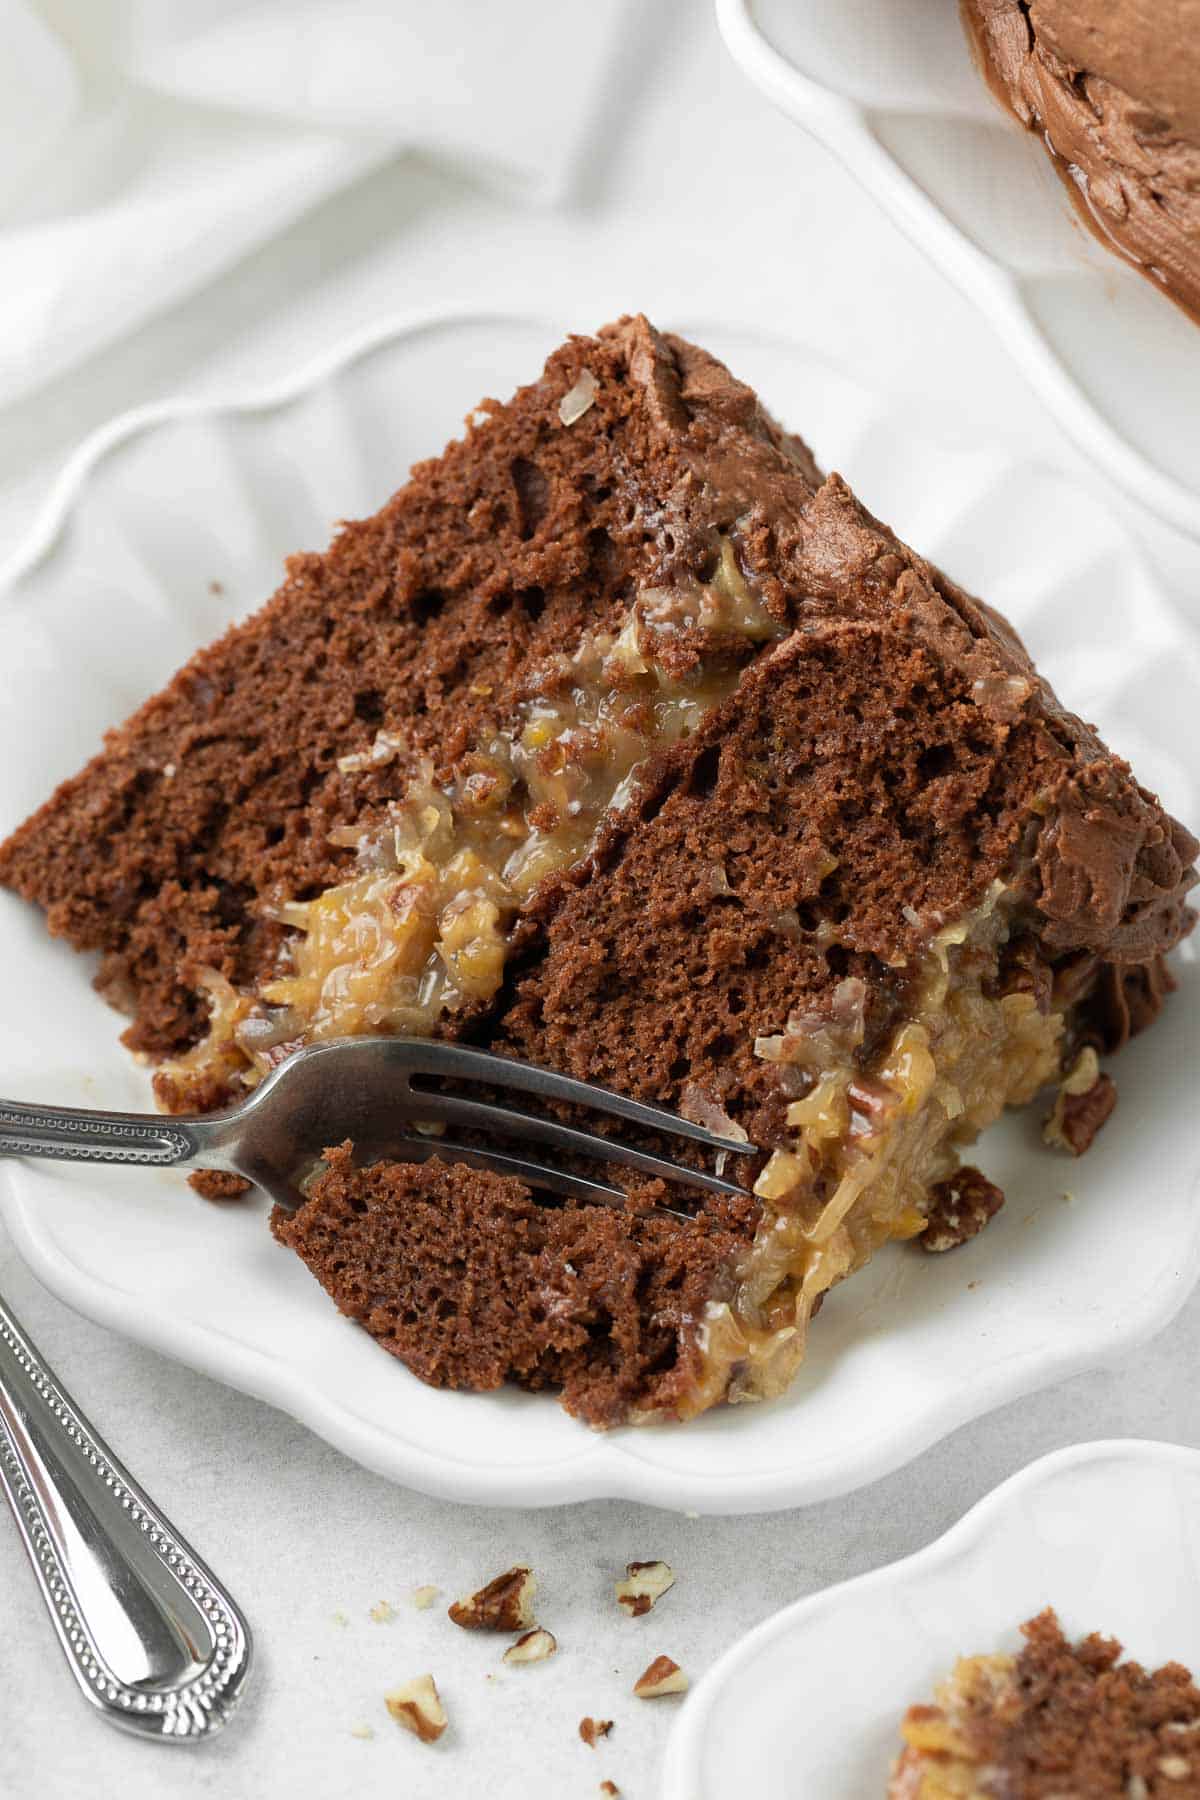 A slice of German chocolate cake on a plate, with a fork taking a bite